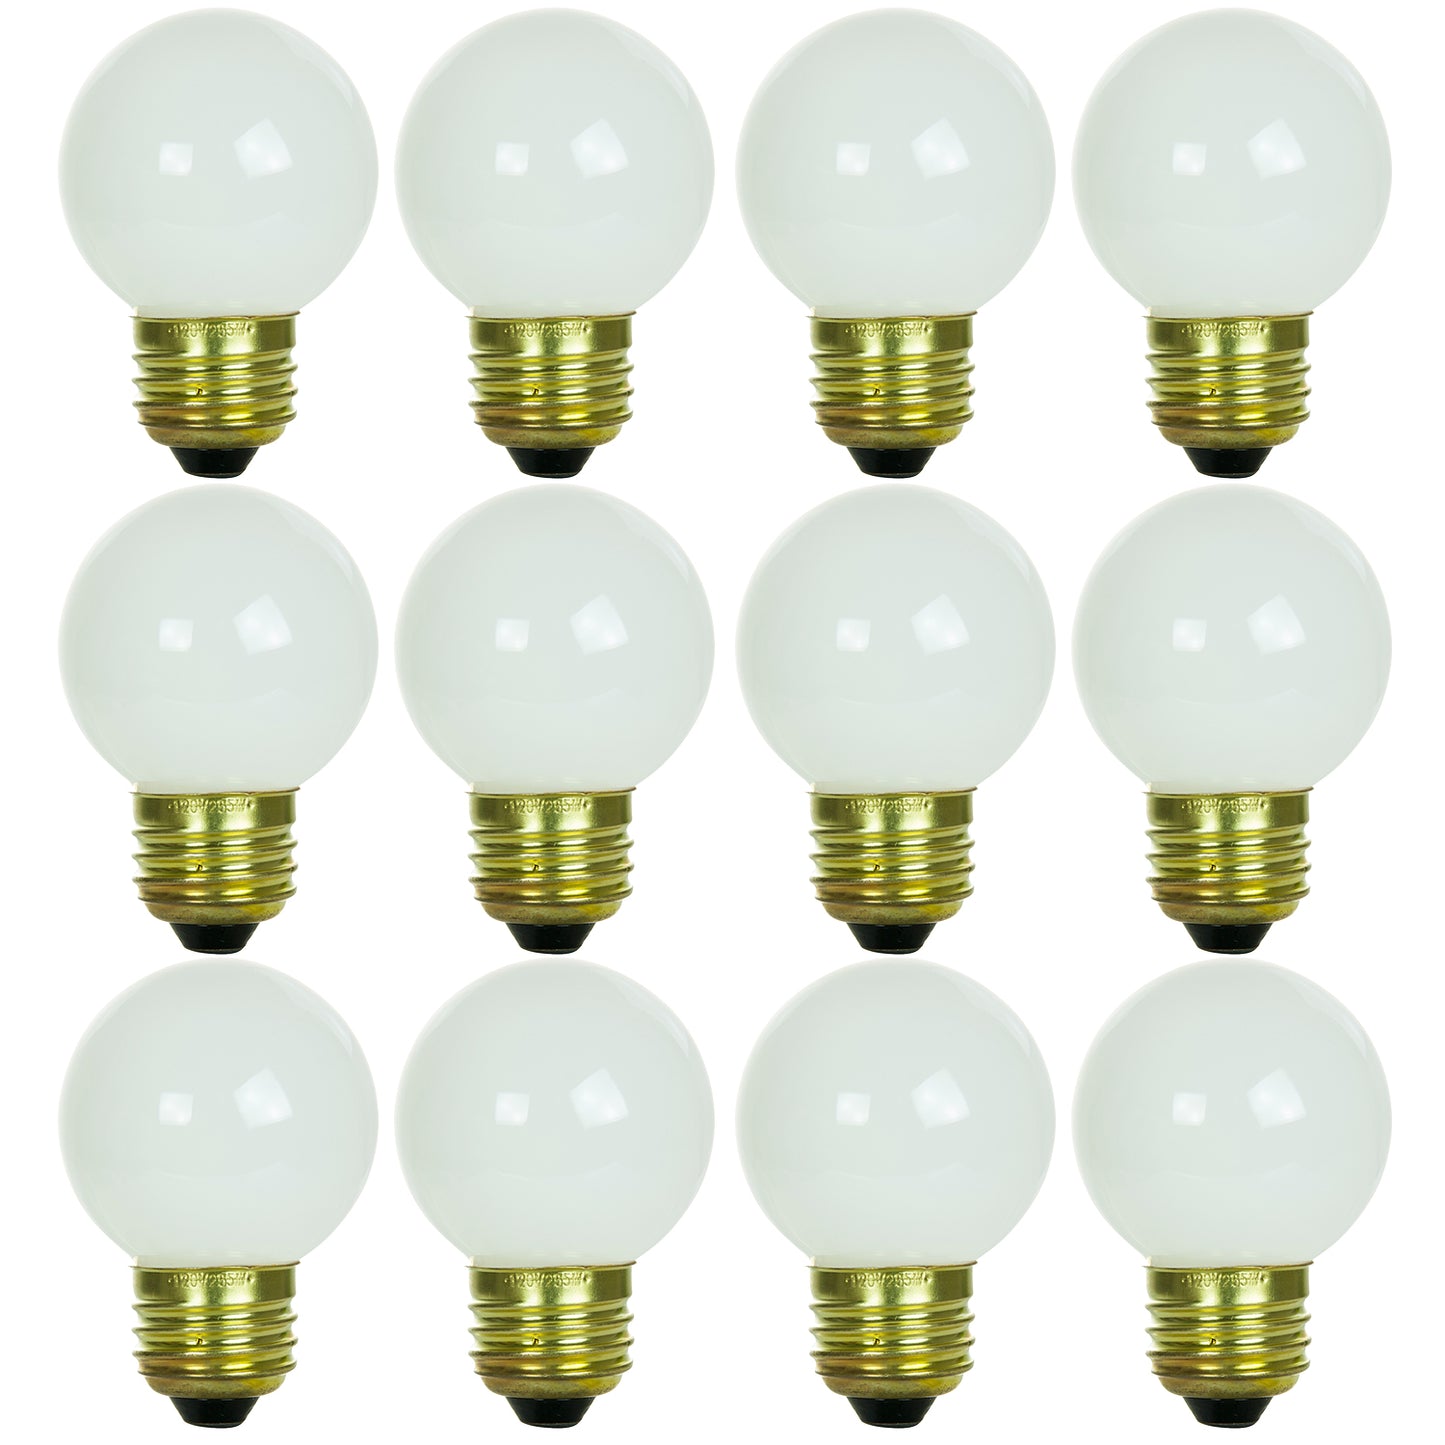 Sunlite 40137 G16 Globe Incandescent Light Bulbs, 25 Watts, Medium Base (E26), 120 Volt, Dimmable, 150 Lumens, Title 20 Approved, 2600K Warm White, Frost, 12 Count